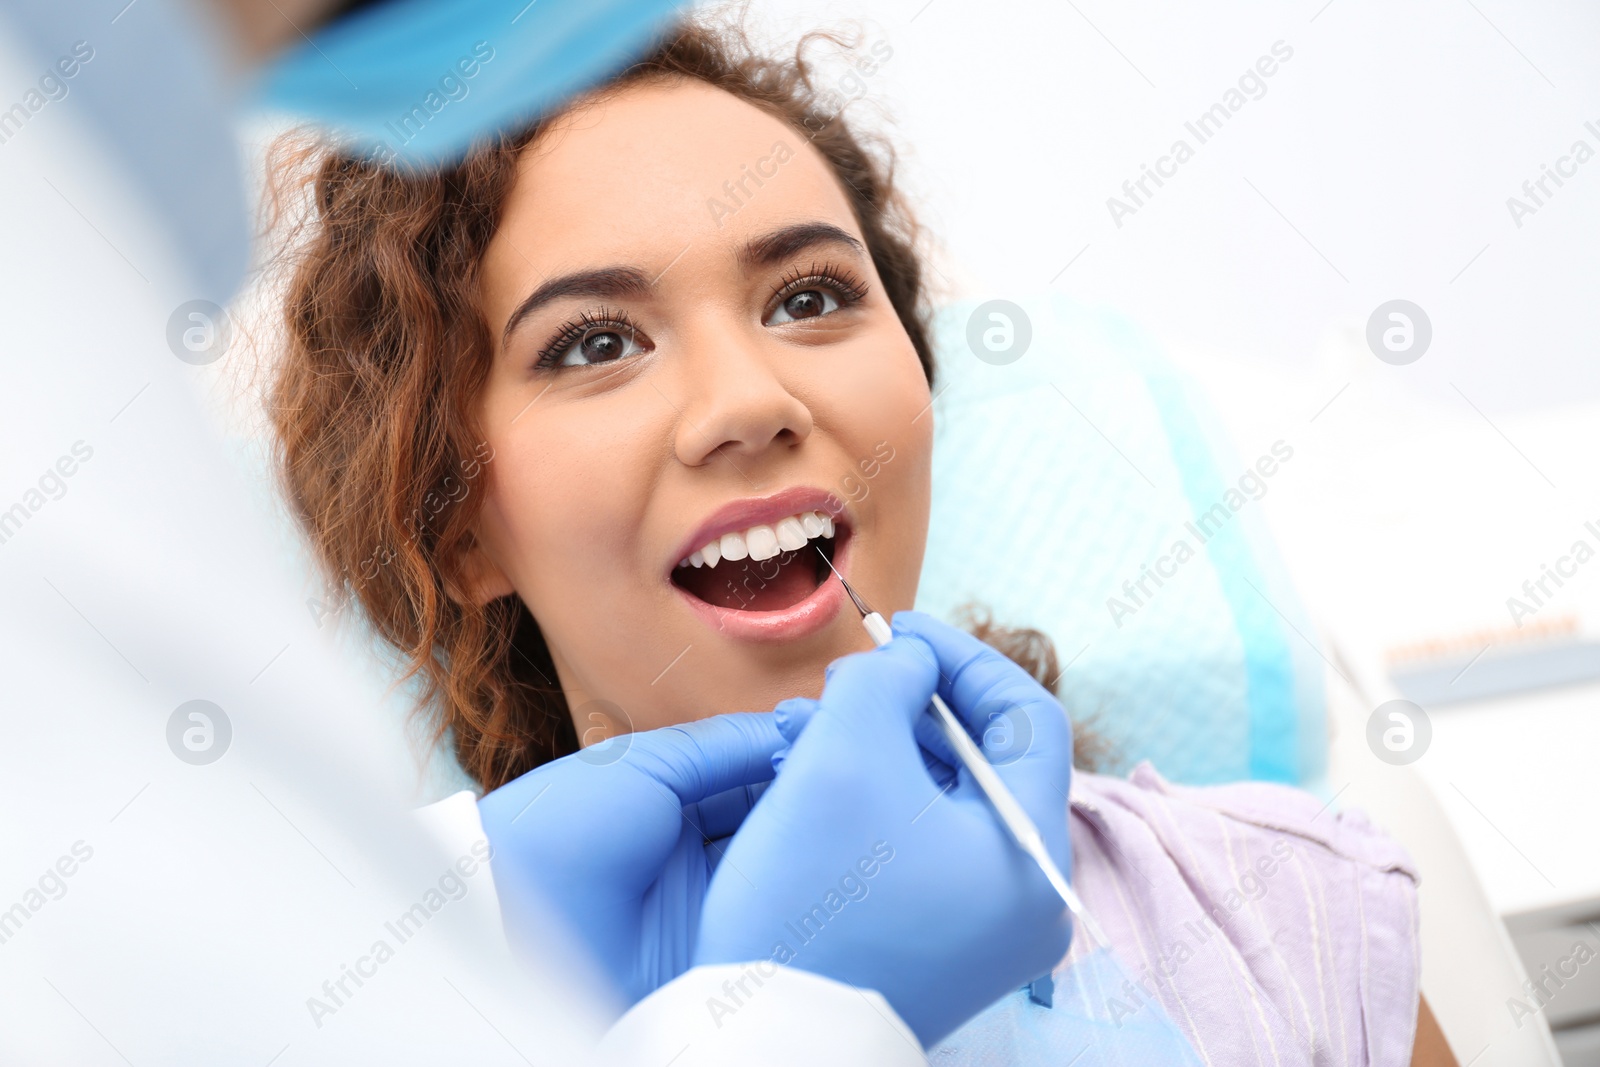 Photo of Dentist examining African-American woman's teeth with probe in hospital